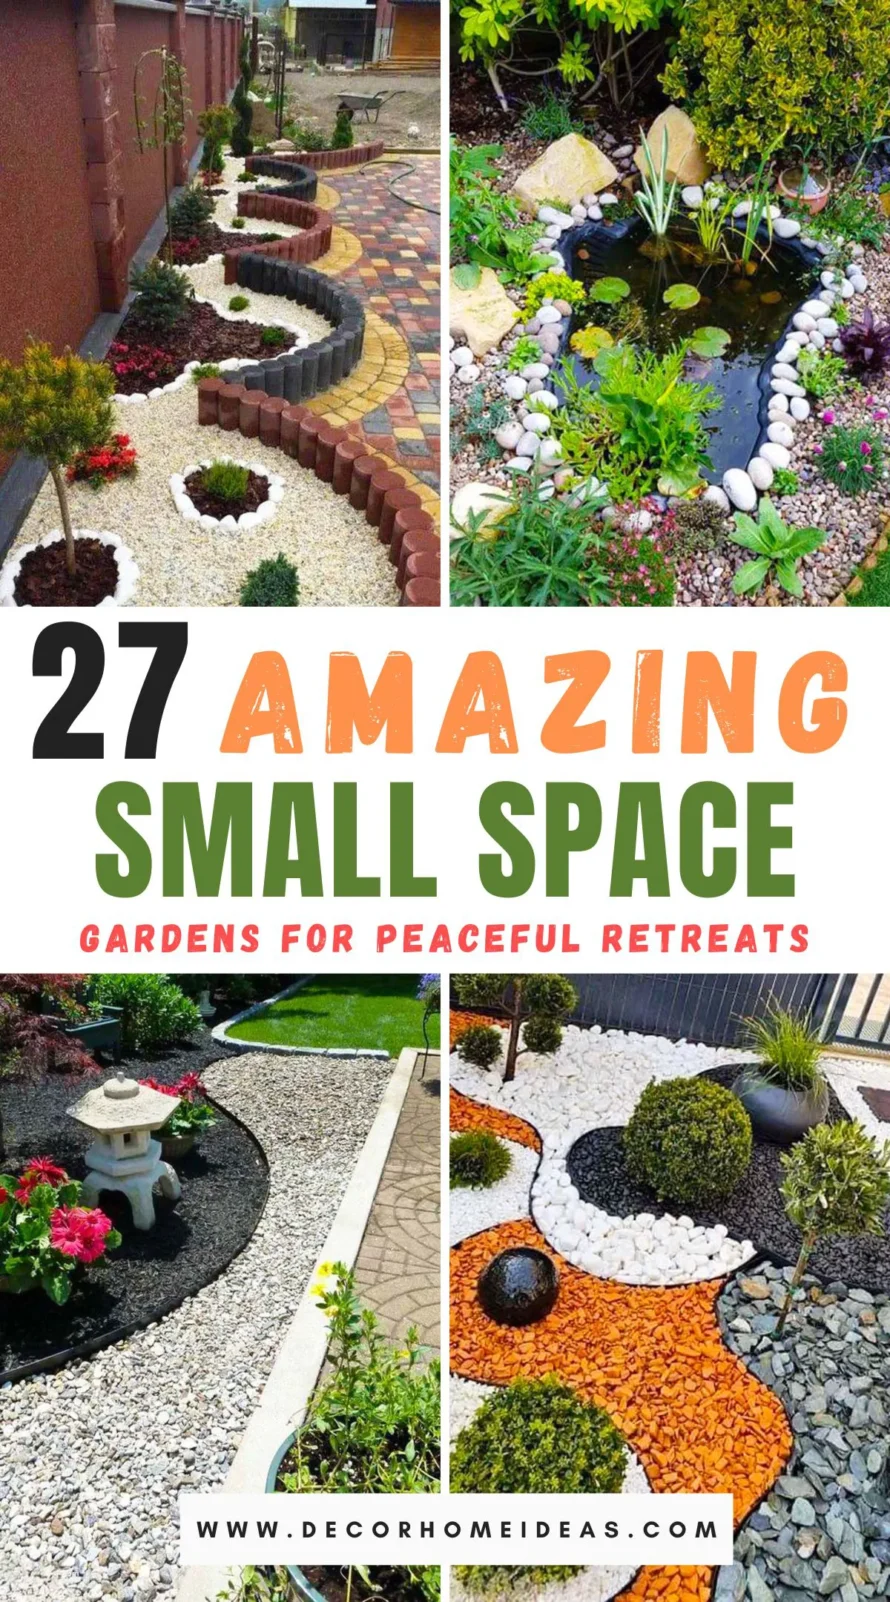 Discover how to transform tiny areas into serene garden retreats. This guide offers 27 innovative designs perfect for small spaces, providing a peaceful escape right in your own backyard. Dive in to explore creative solutions and tips!